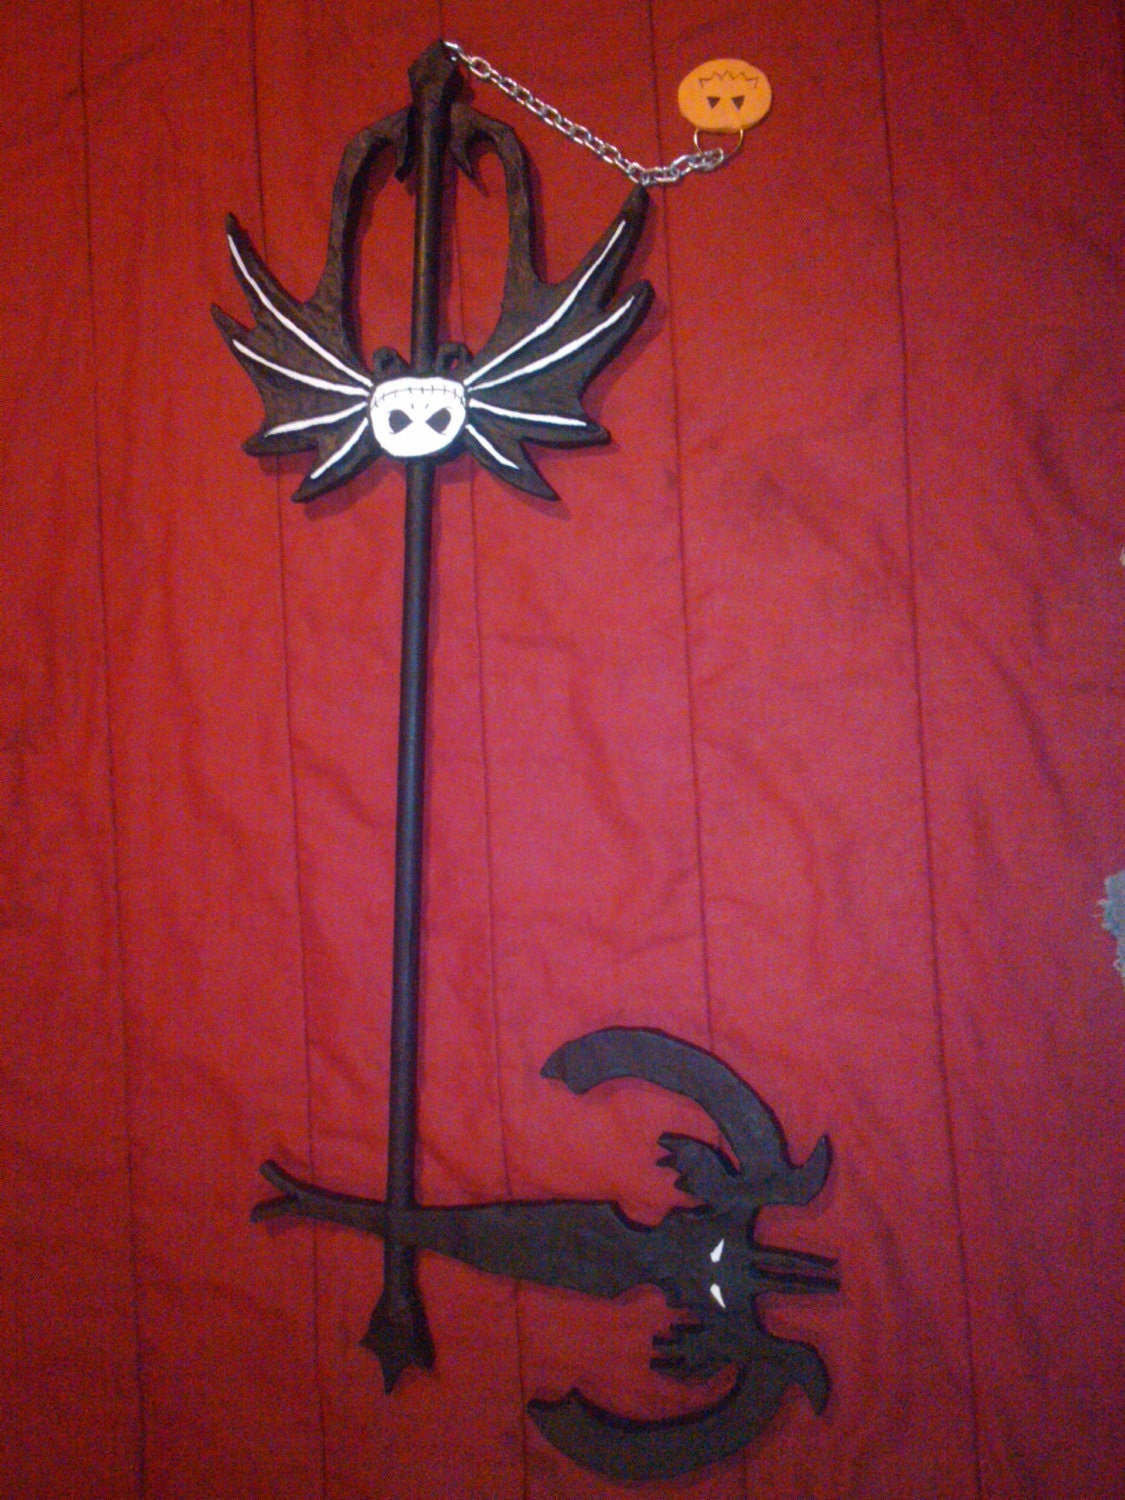 Nightmare Before Christmas Keyblade by mousemystictherge on Etsy